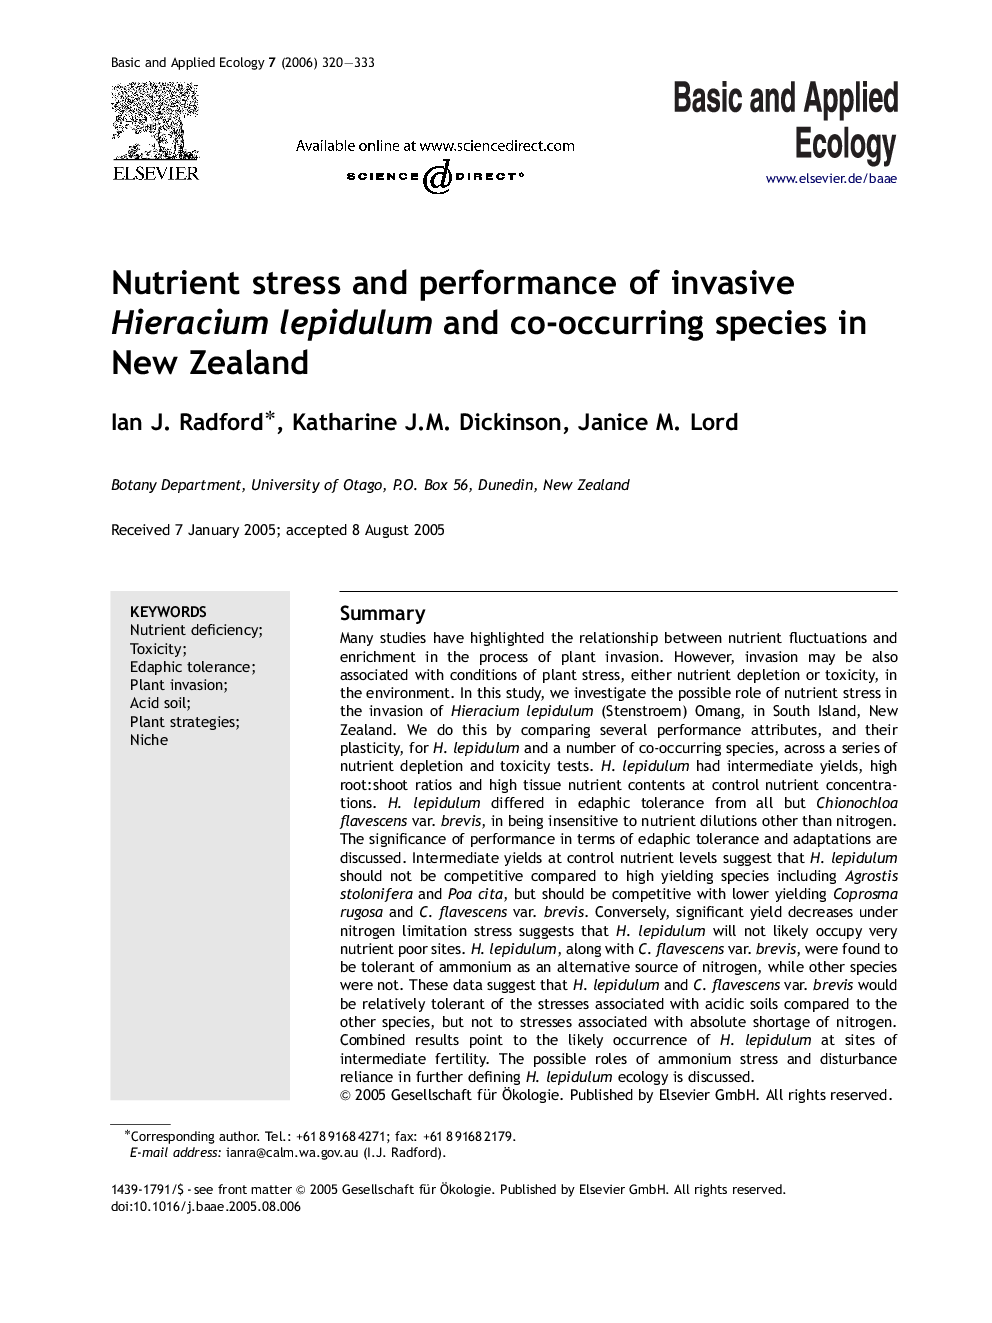 Nutrient stress and performance of invasive Hieracium lepidulum and co-occurring species in New Zealand